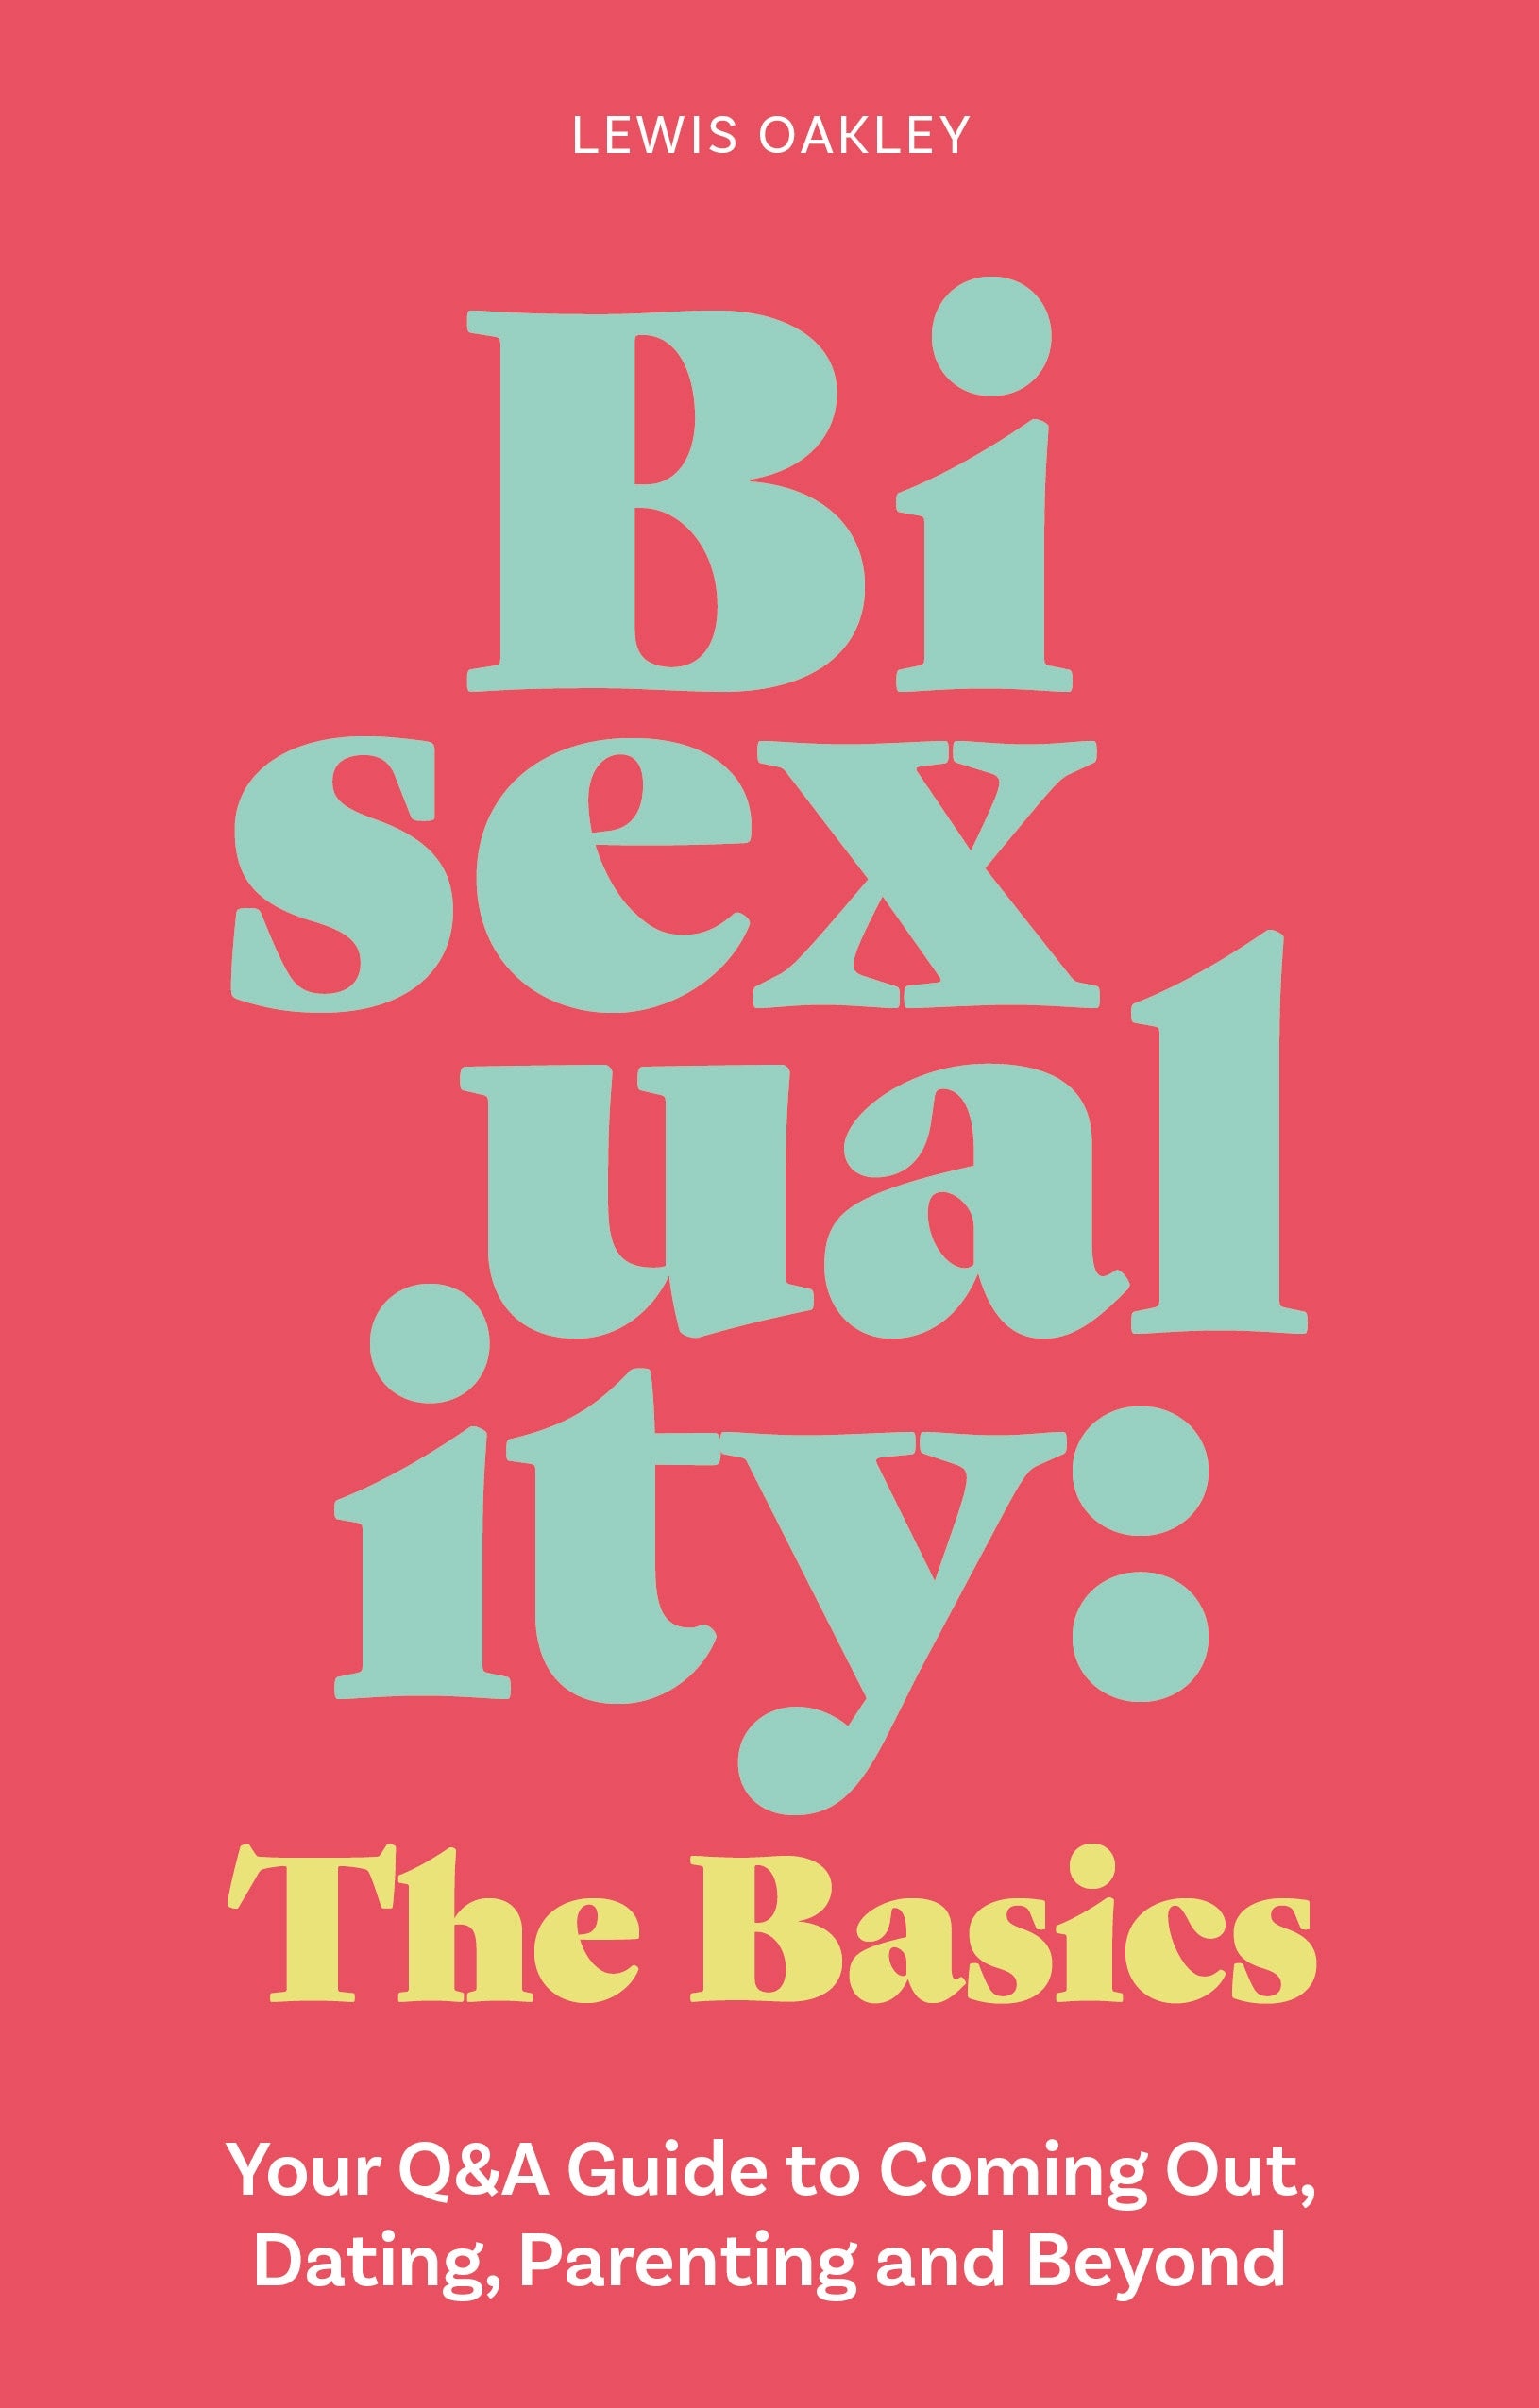 Bisexuality: The Basics by Lewis Oakley